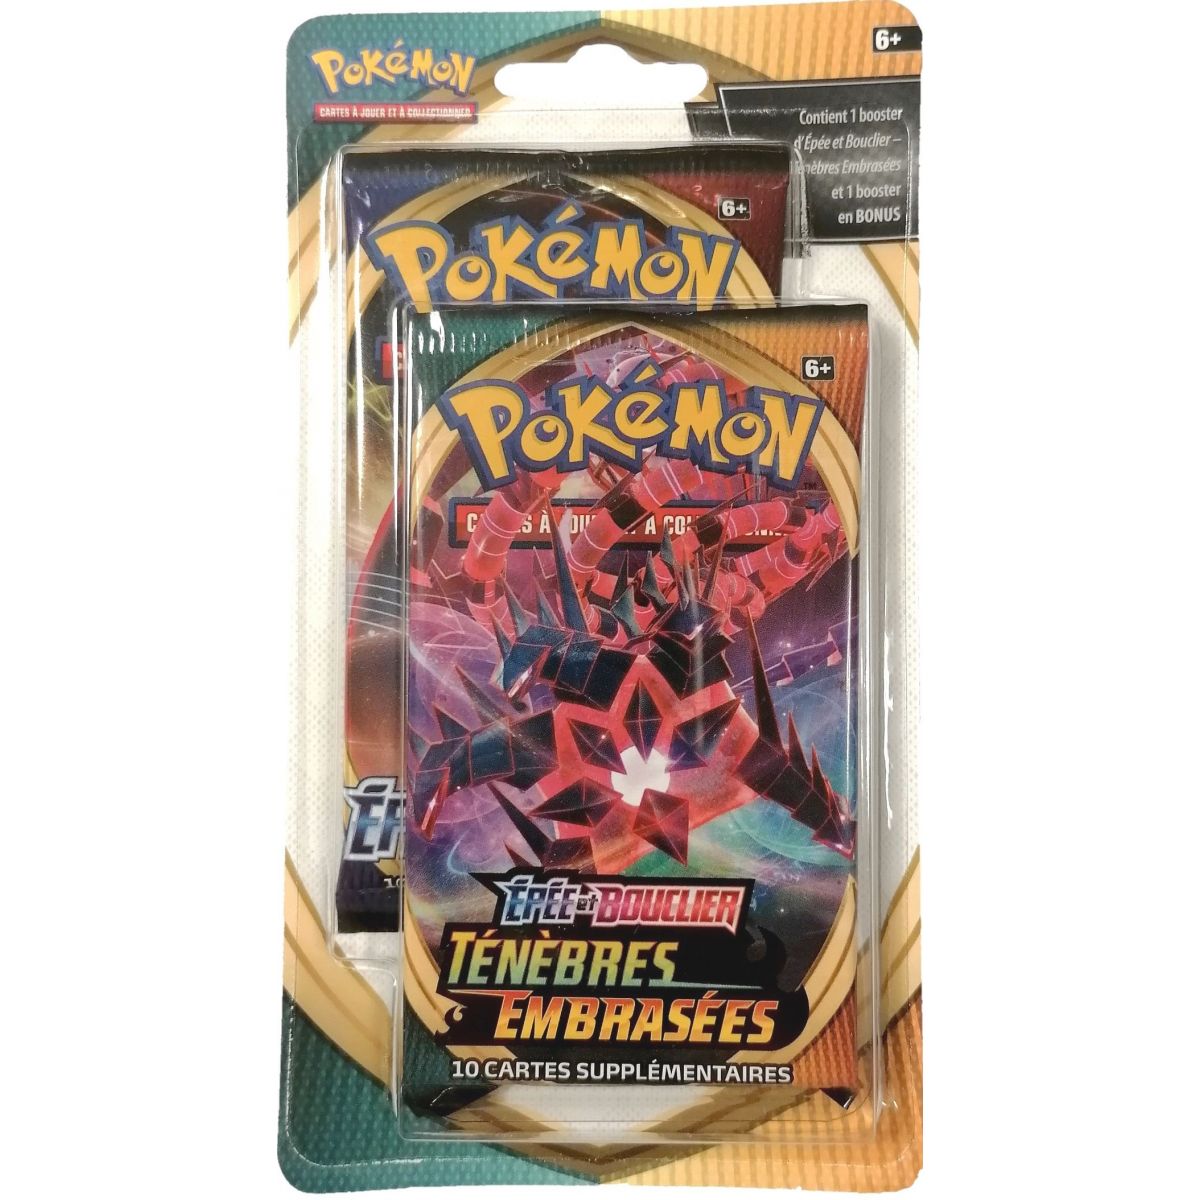 Pokémon - Duo-Pack - Darkness Ablaze [EB03] / Sword and Shield [EB01] - Canada Exclusive